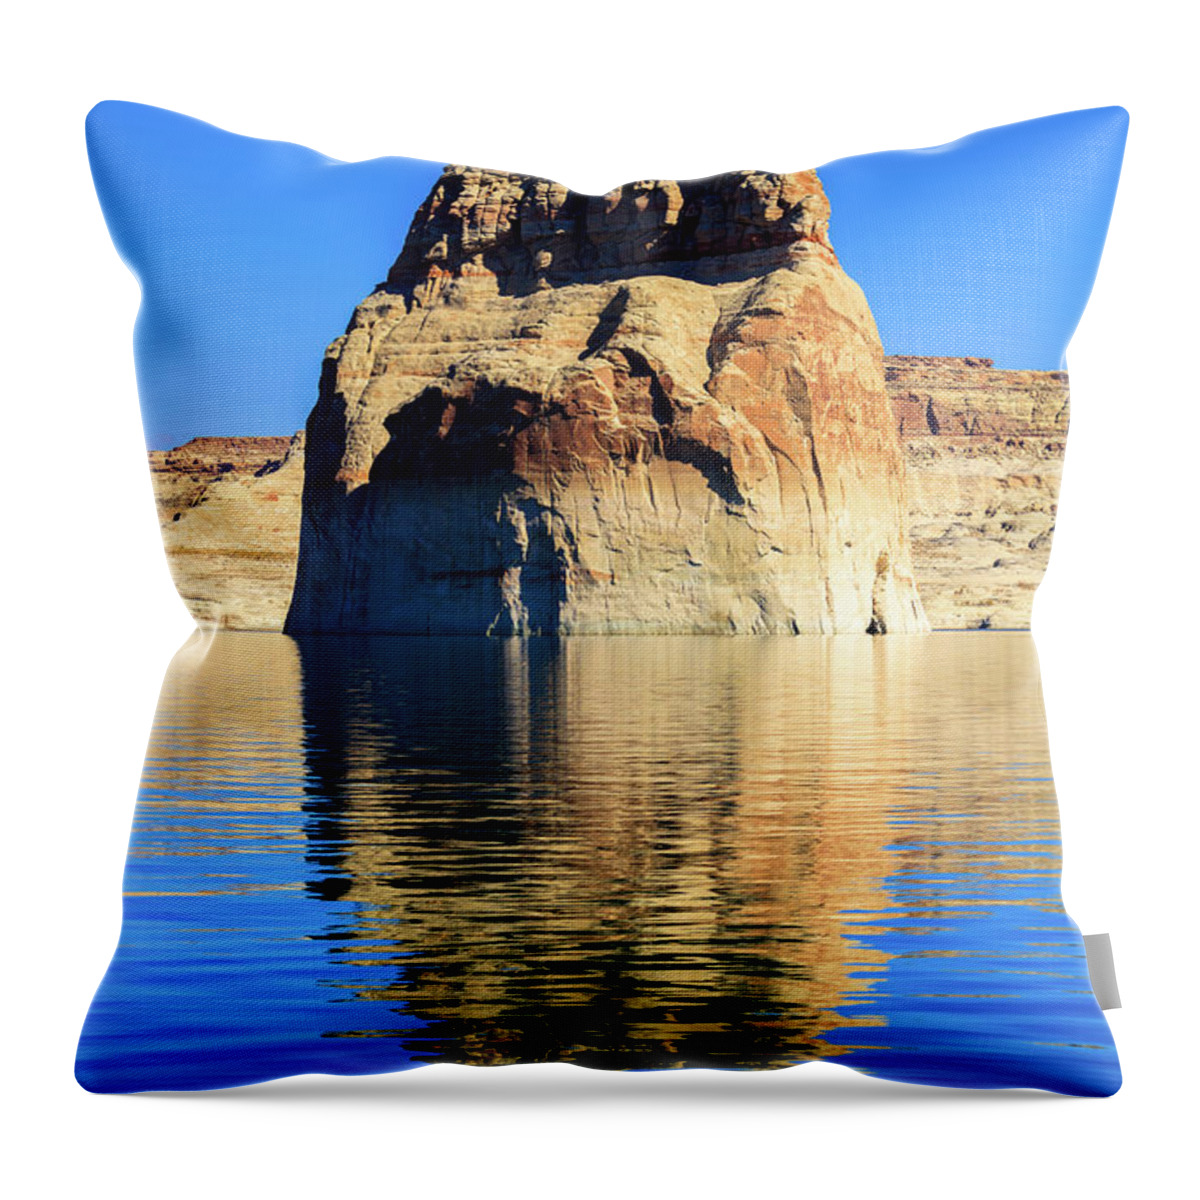 Lone Rock Canyon Throw Pillow featuring the photograph Lone Rock Canyon by Raul Rodriguez